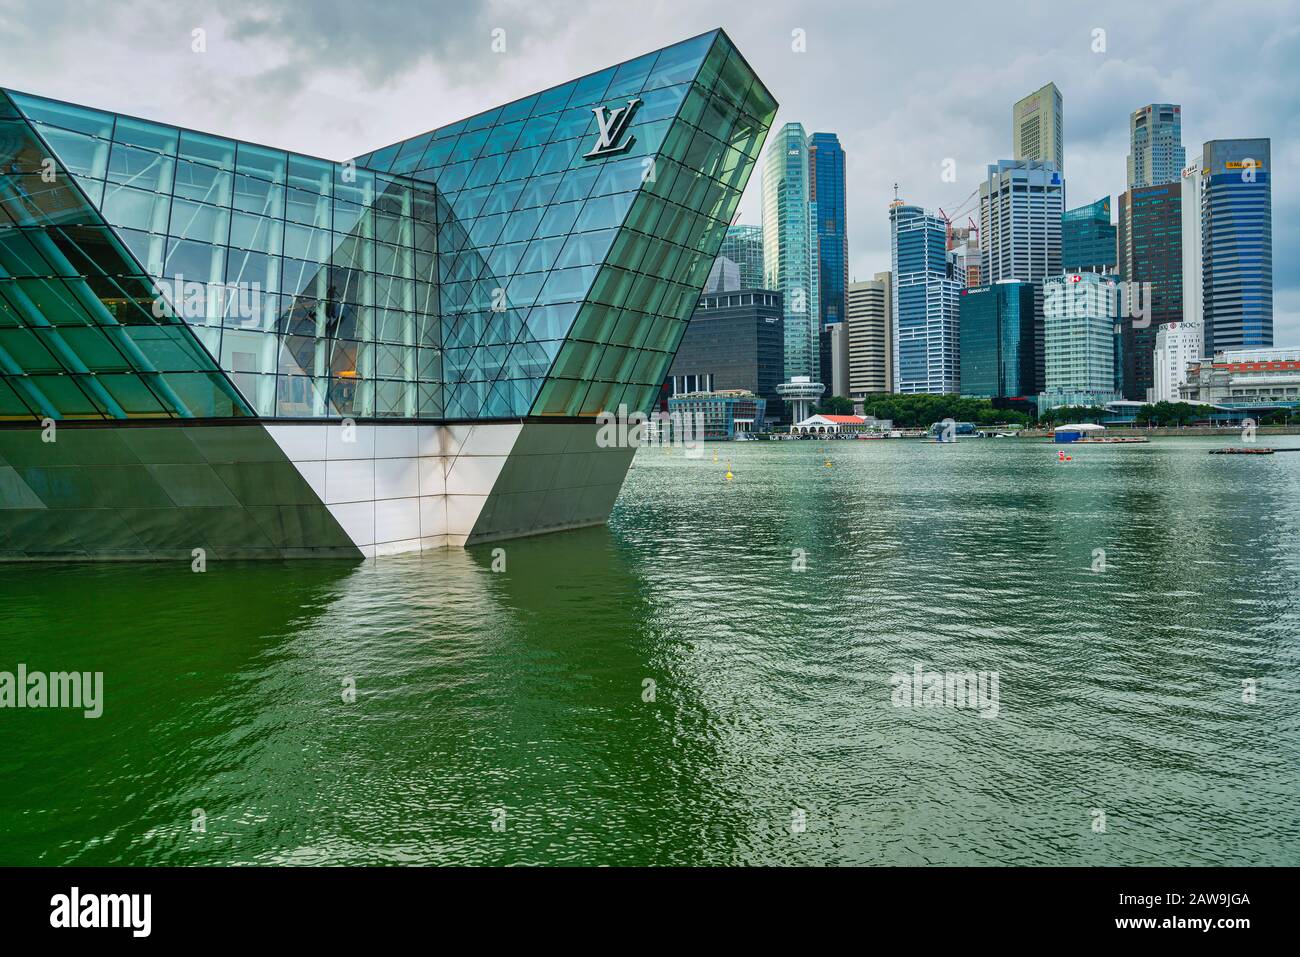 ArtScience Museum and the Louis Vuitton Island Maison at Marina Bay Sands.  Singapore Stock Photo - Alamy